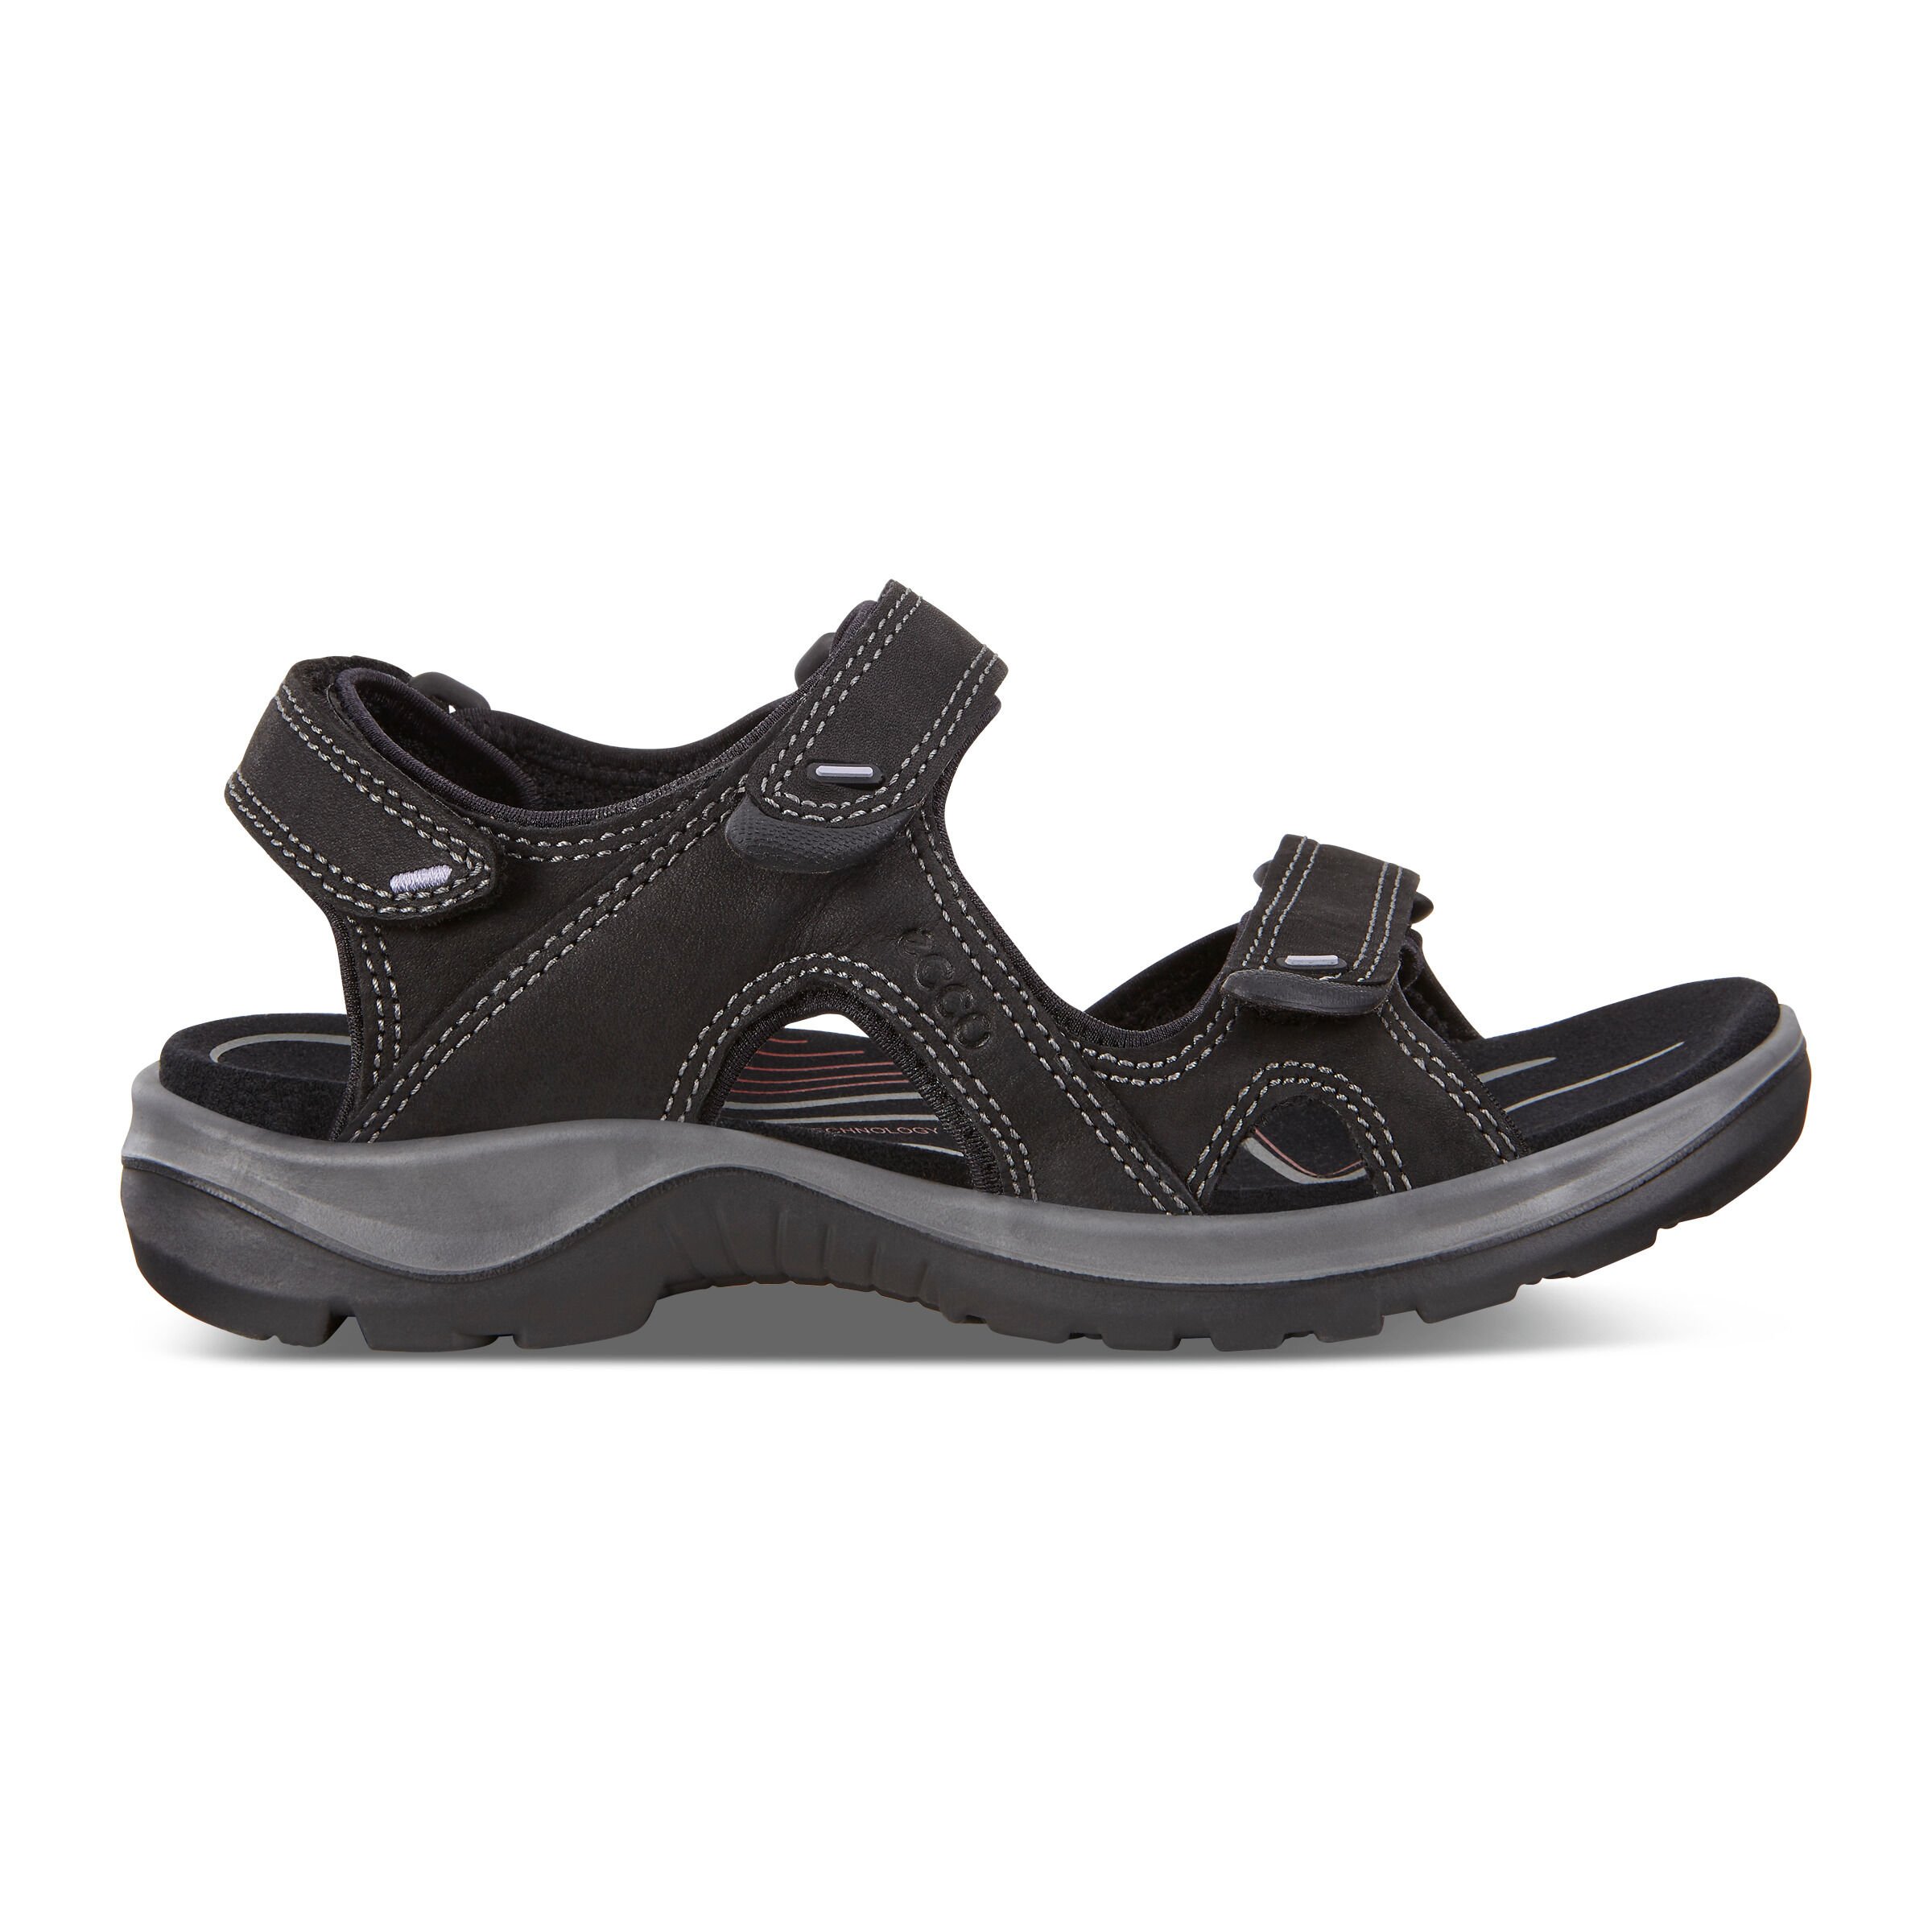 ecco sandals clearance